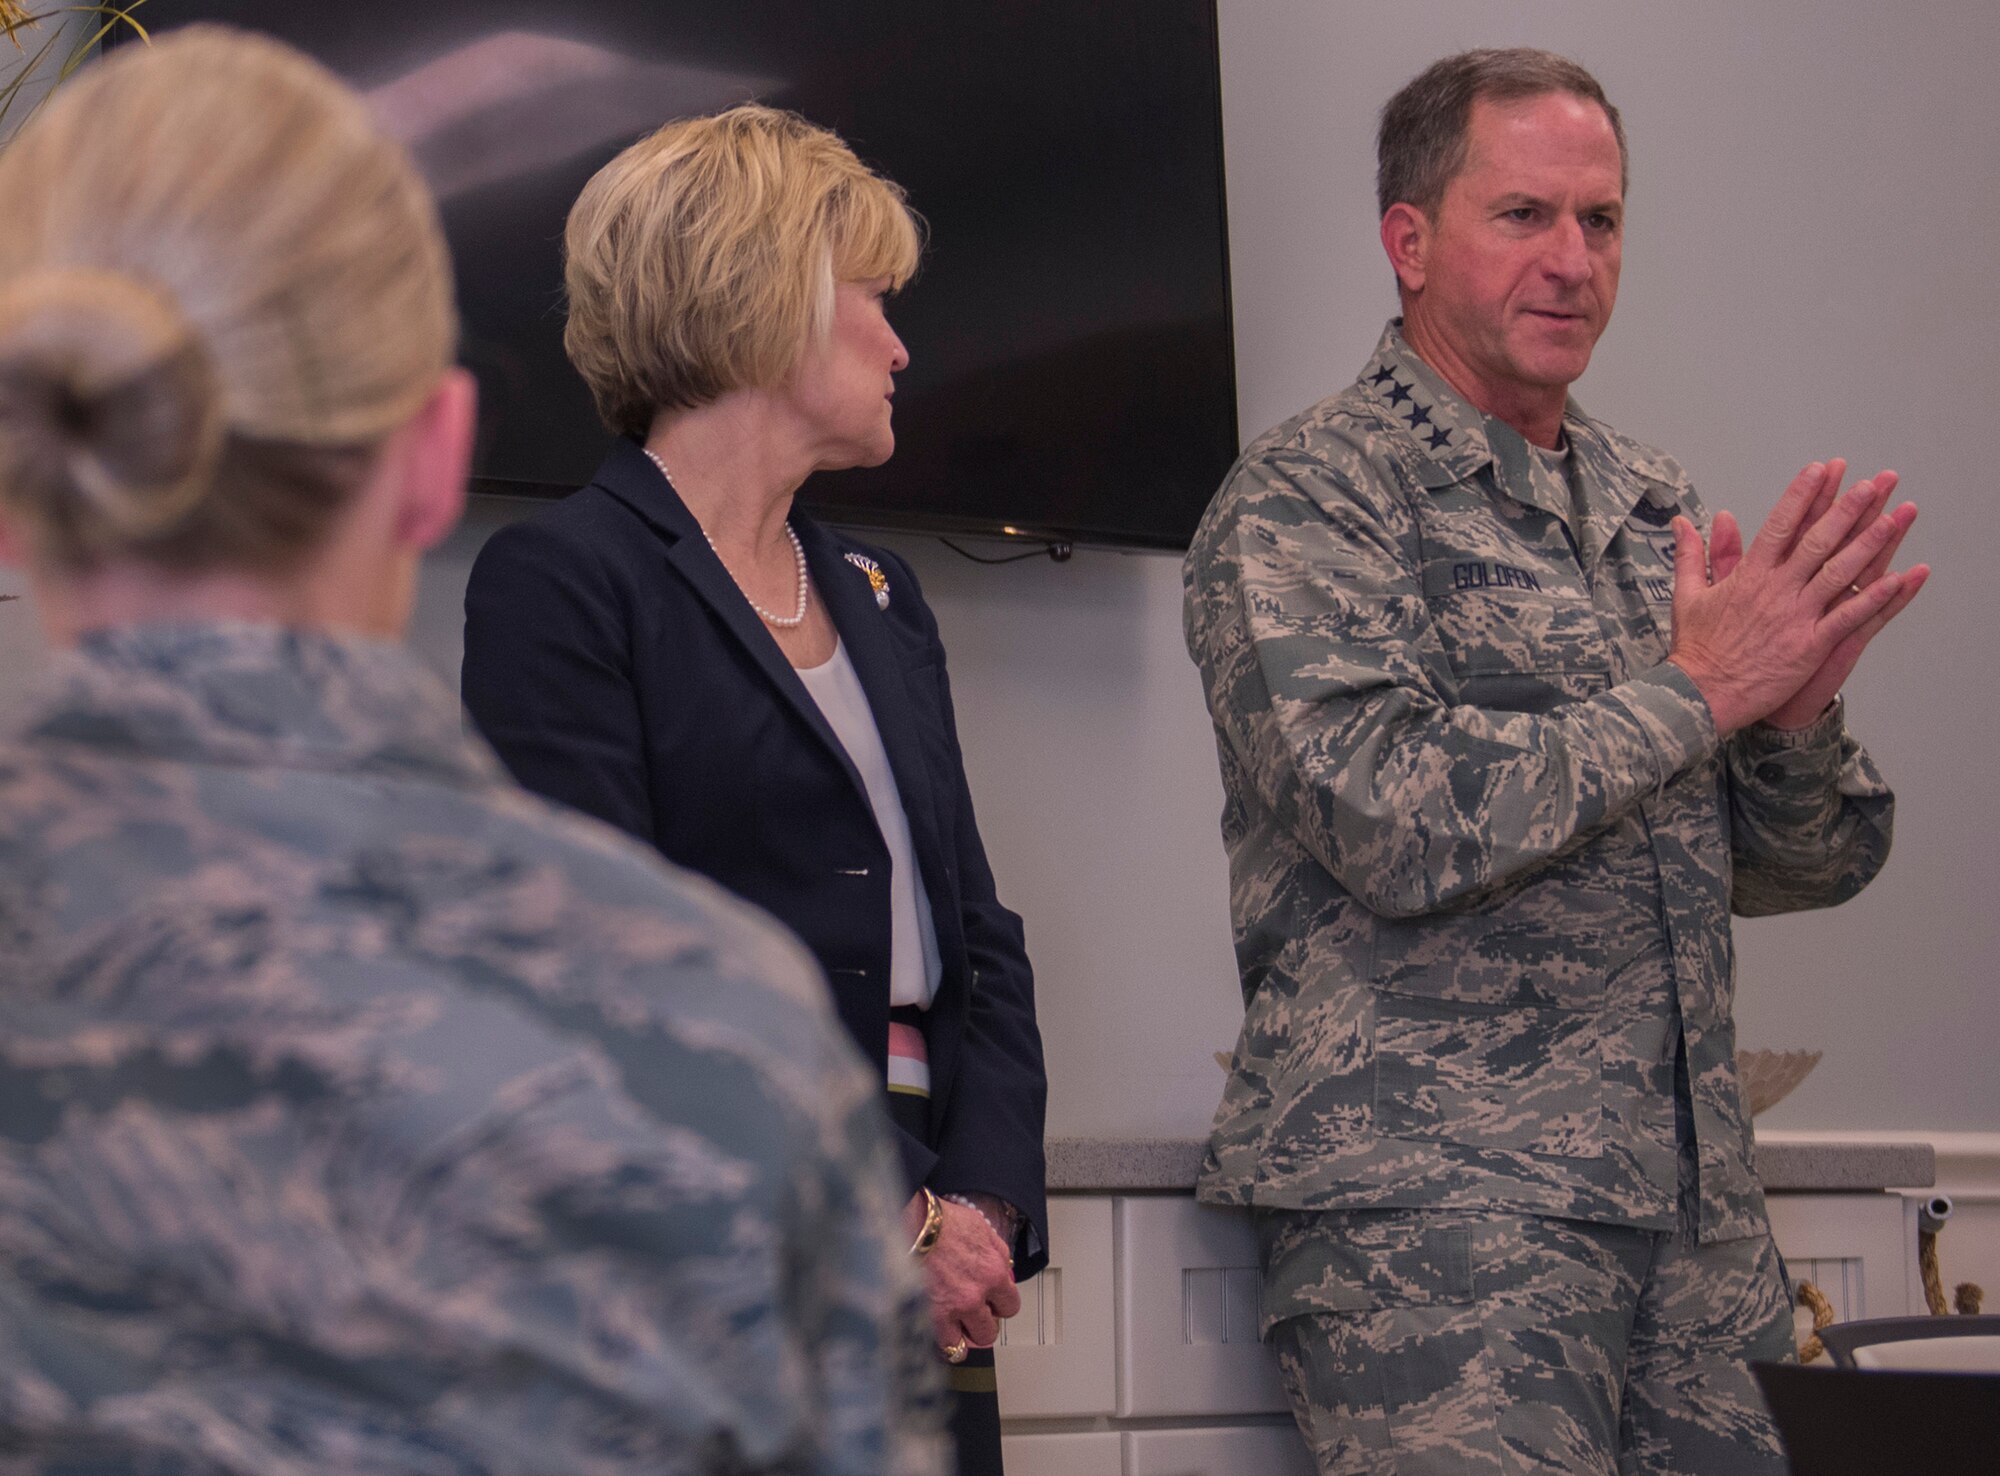 Air Force Chief of Staff Gen. David L. Goldfein and his spouse, Dawn, talk with junior Airmen during their visit to Eglin Air Force Base, Fla. May 9. The General and his spouse made brief remarks before taking questions from the Airmen and their spouses. The topics ranged from the F-35 to daycare. Goldfein also spoke about his combat experience as a fighter pilot. (U.S. Air Force photo/Ilka Cole) 